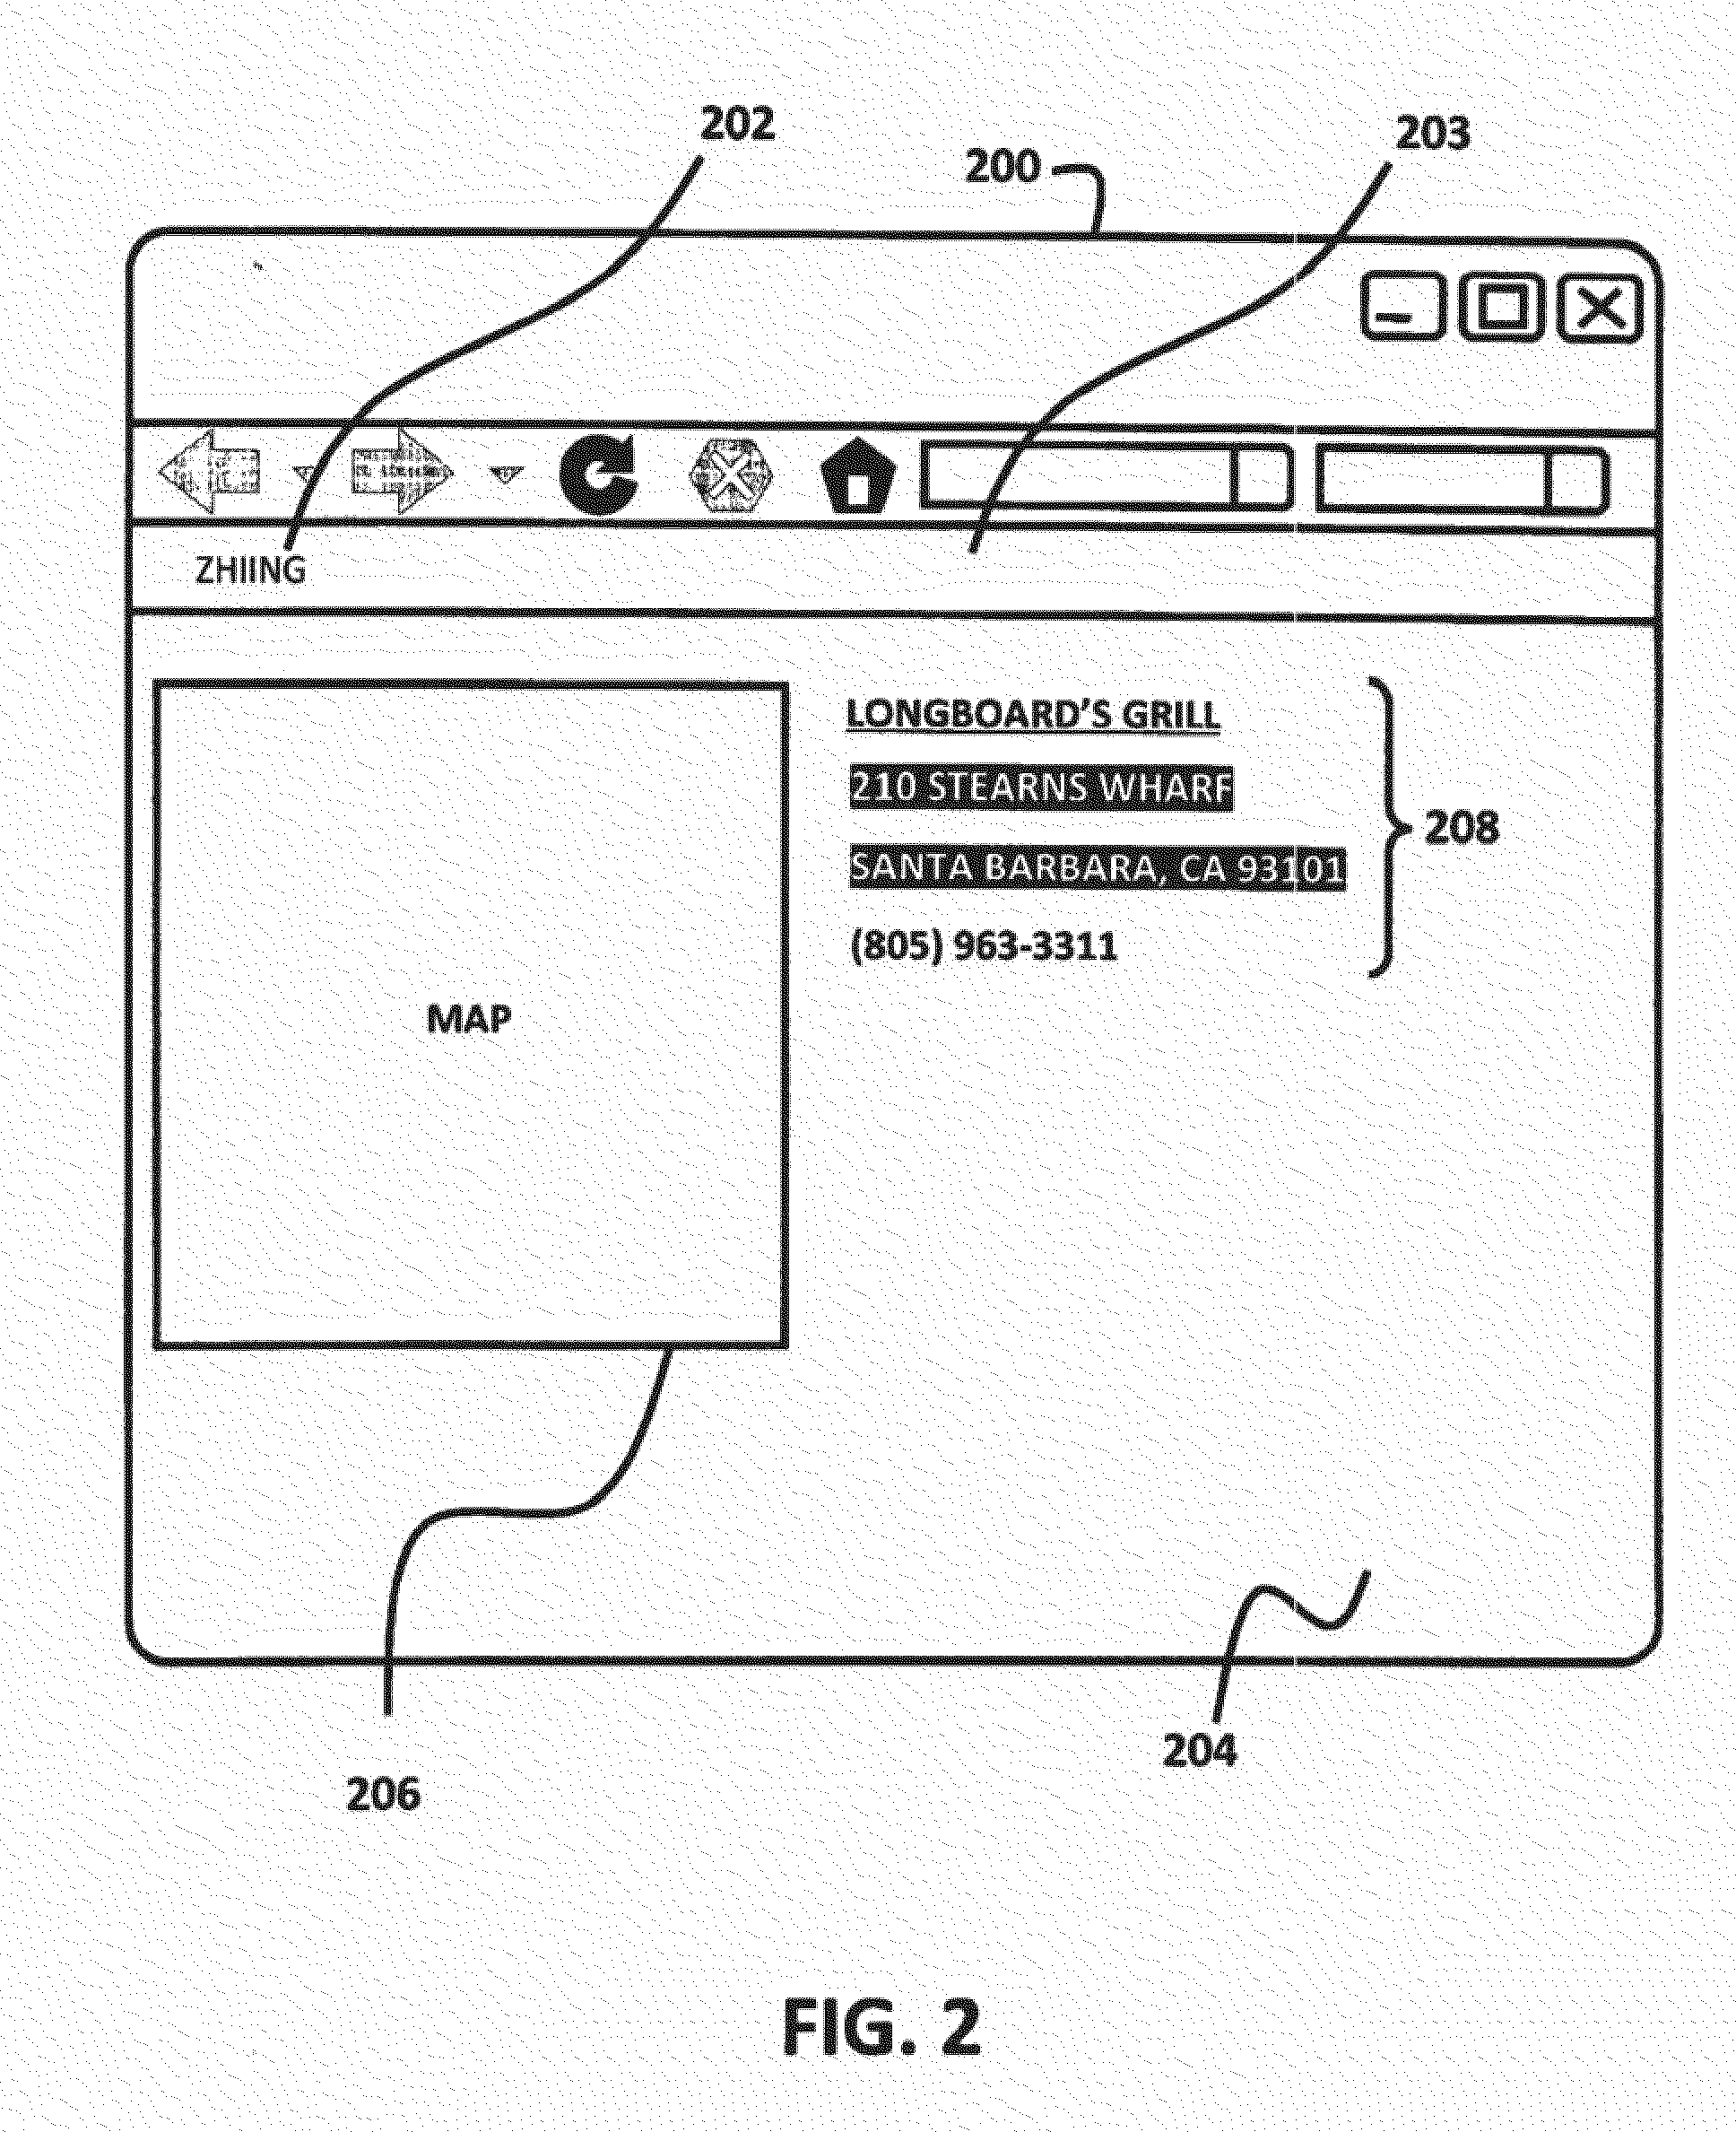 Methods for Virally Distributing Location-Based Applications